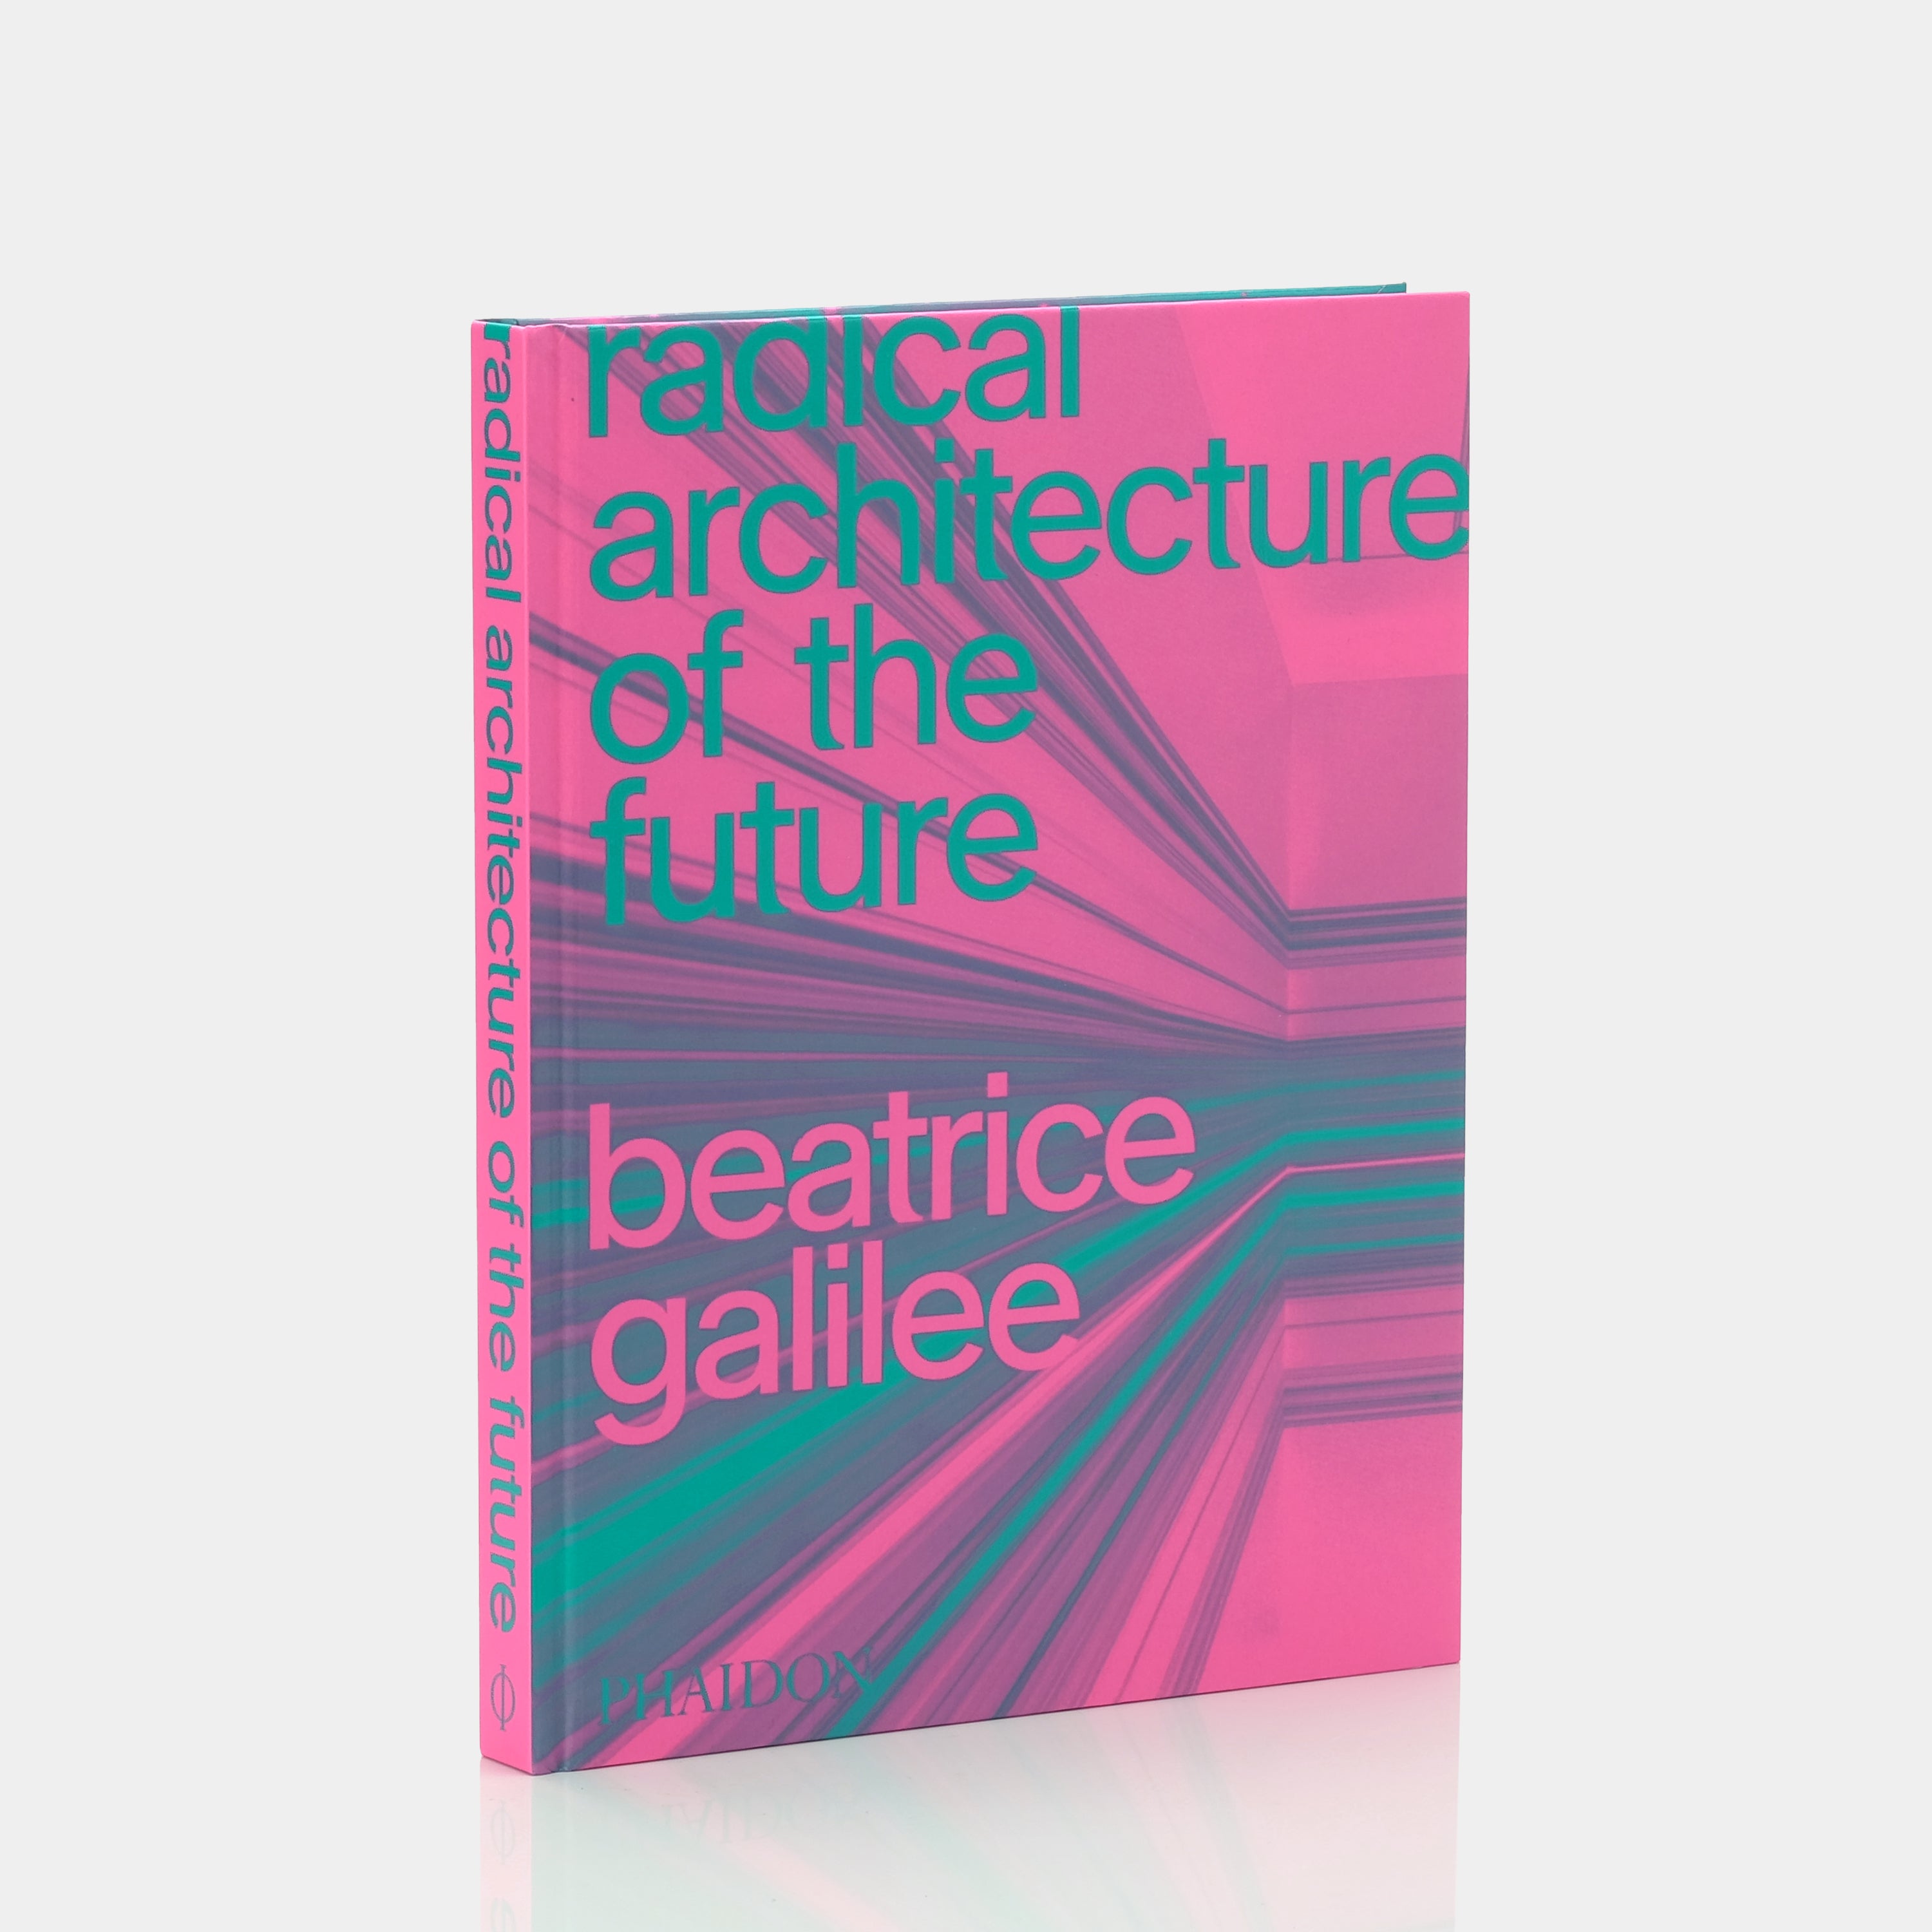 Radical Architecture of the Future by Beatrice Galilee Phaidon Book